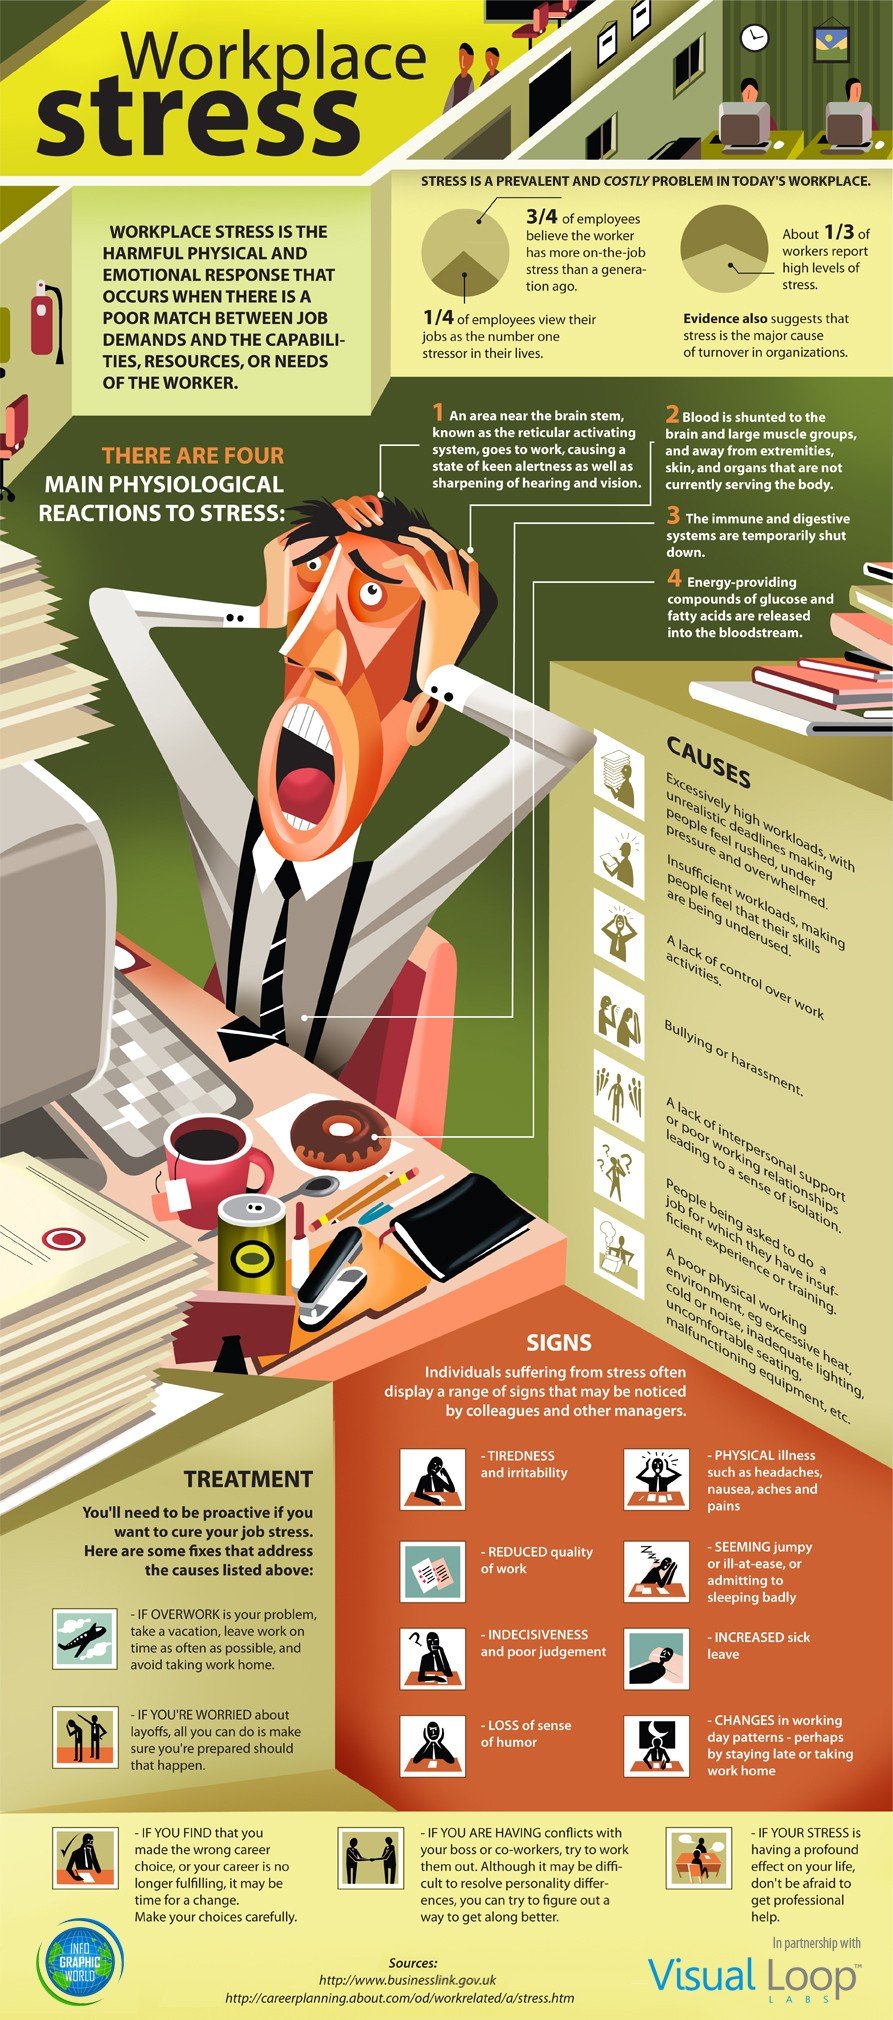 Workplace stress – signs, causes, treatment